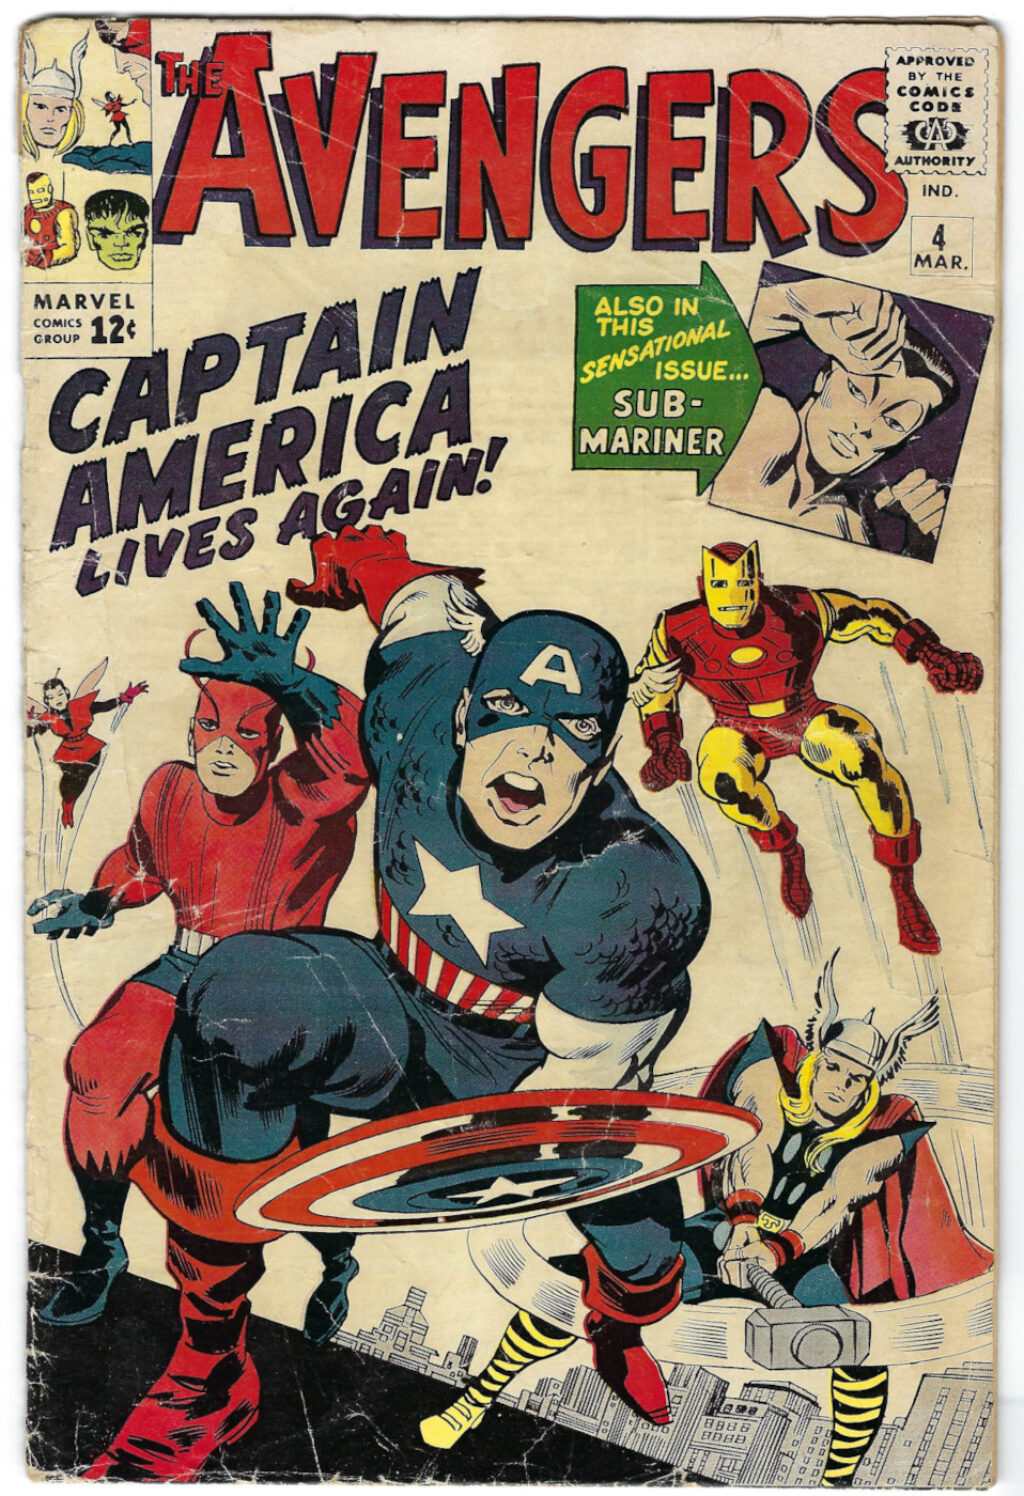 Marvel Comics 1963 Avengers #4: 1st Silver Age Appearance of Captain America 1